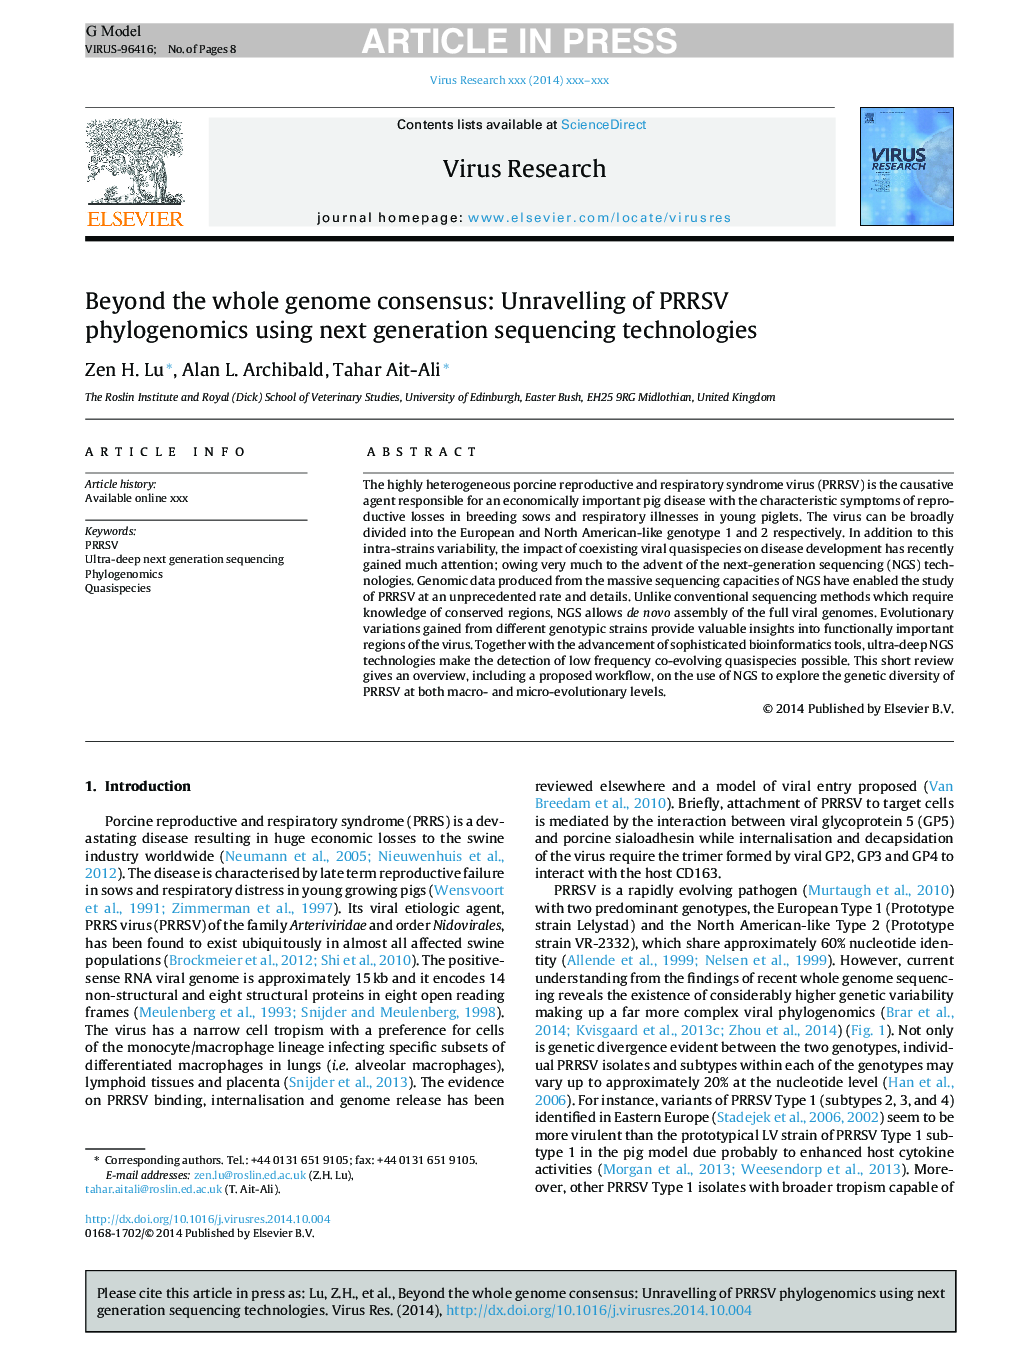 Beyond the whole genome consensus: Unravelling of PRRSV phylogenomics using next generation sequencing technologies